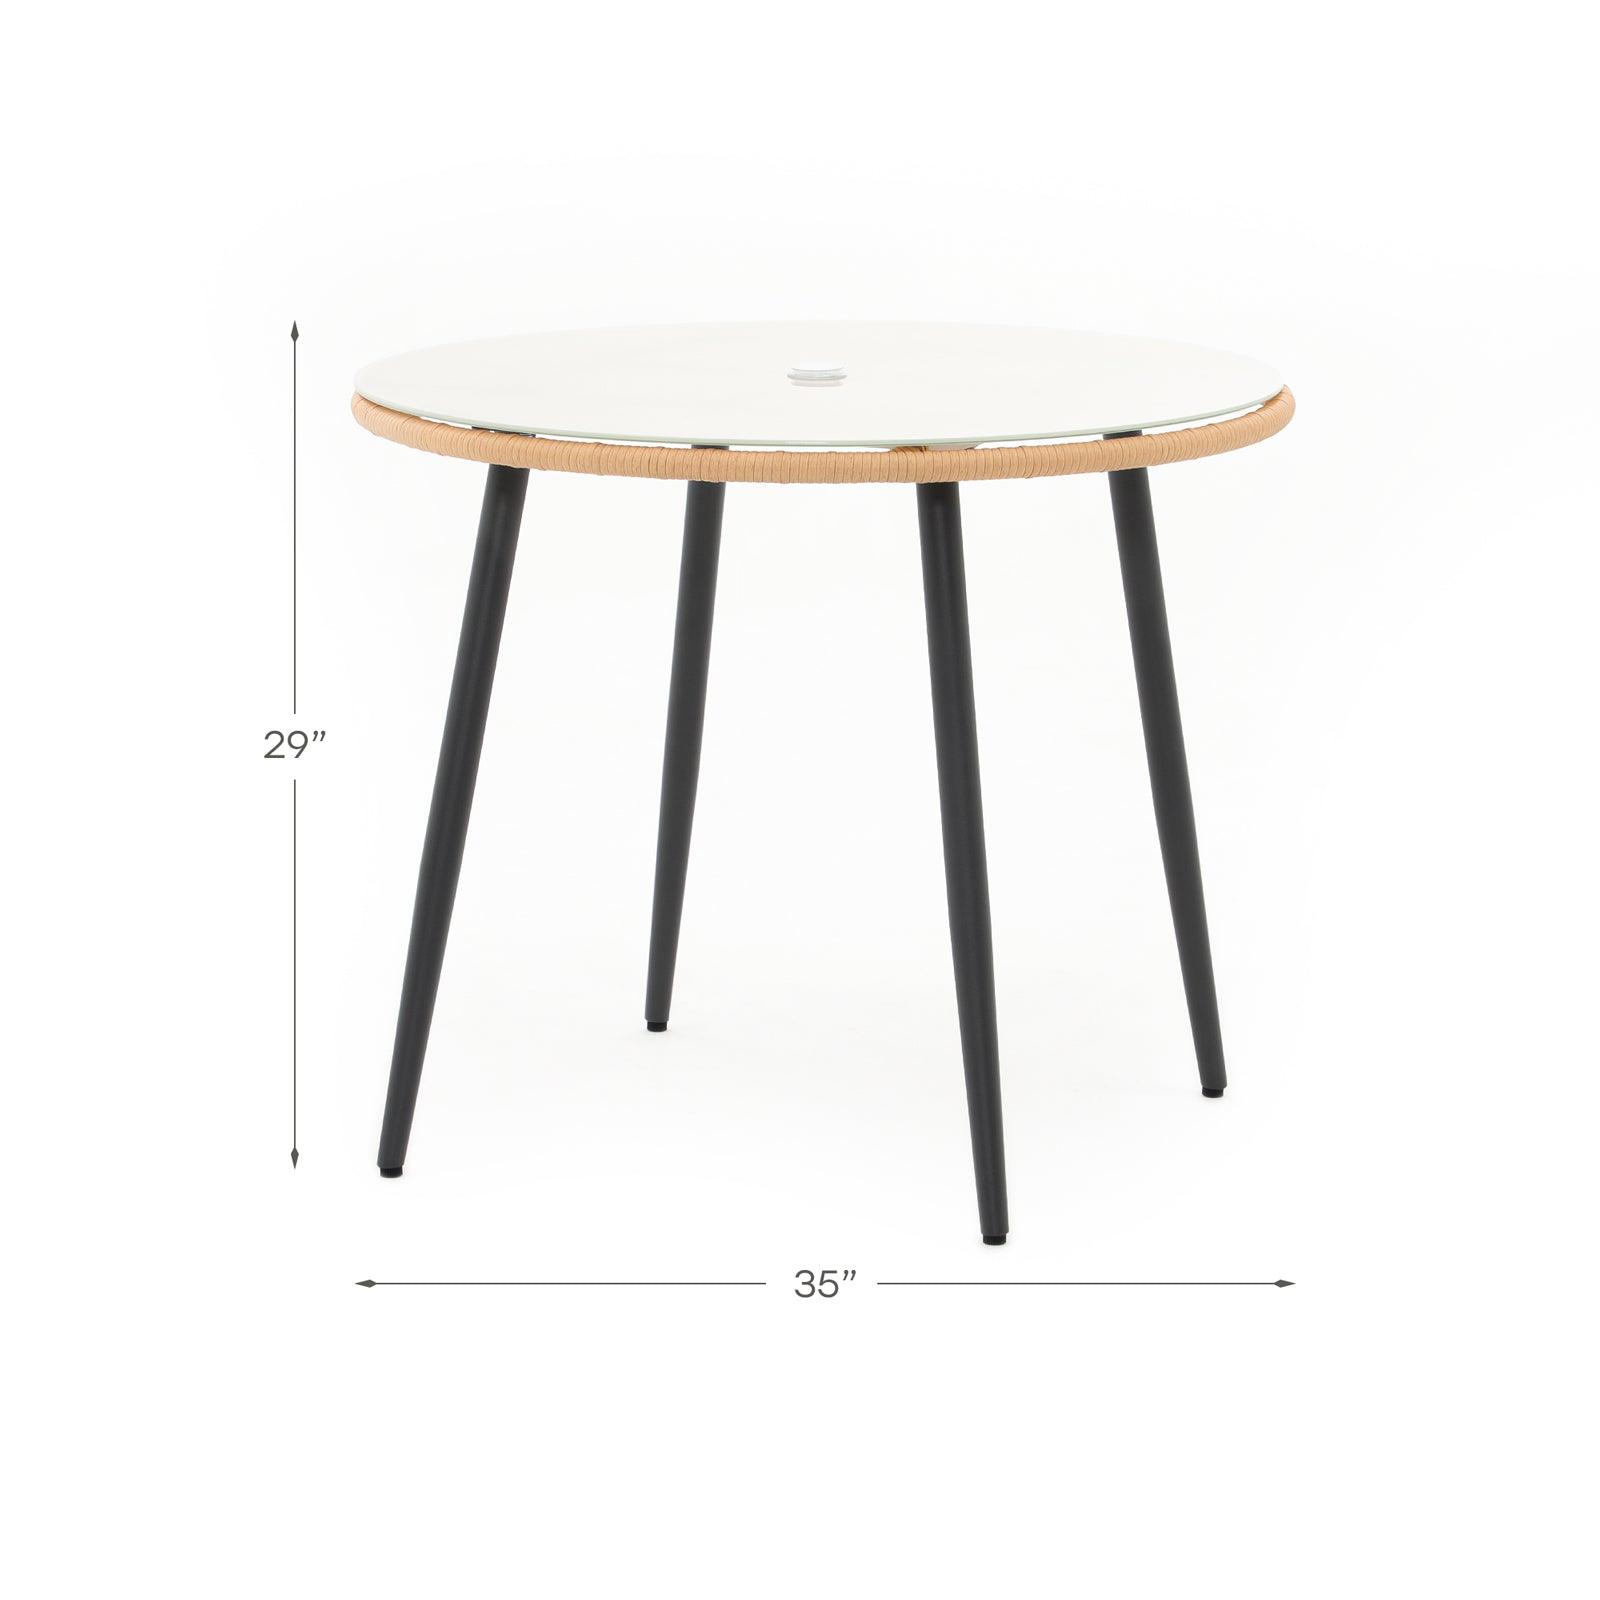 Menorca Dining Table, Round Shape, Tempered Glass, Dimension Information- Jardina Furniture